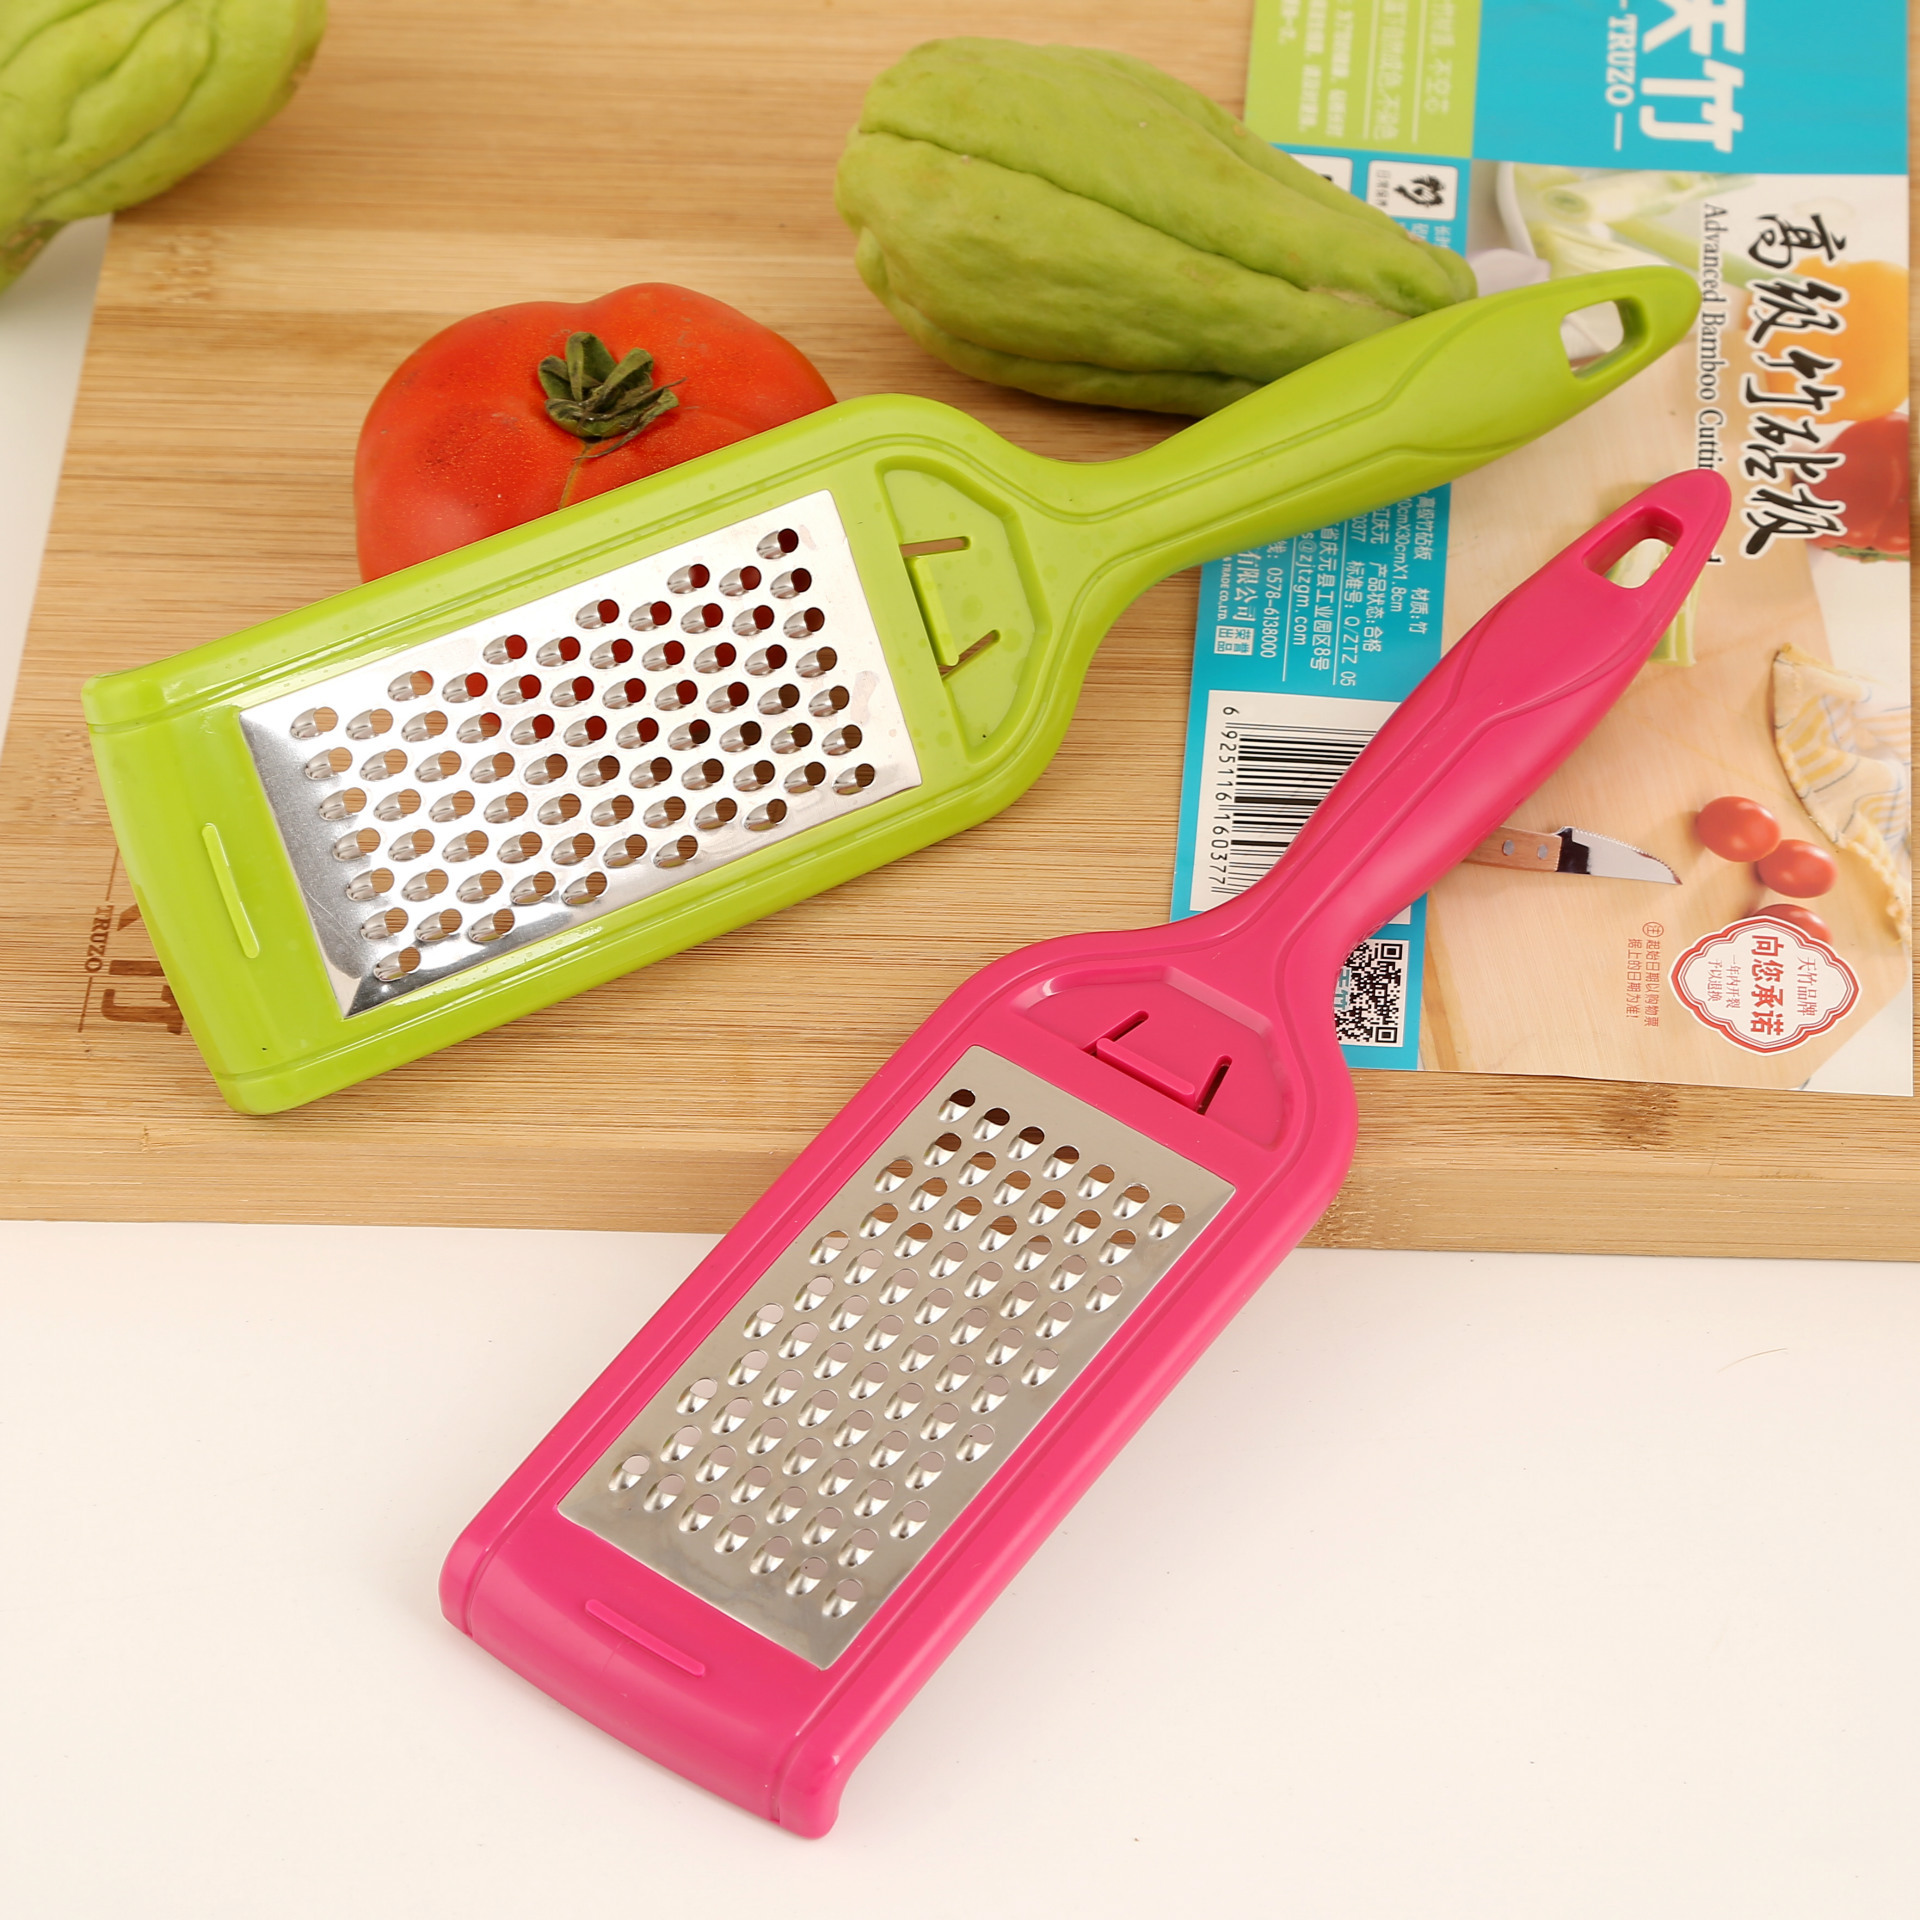 factory direct supply stainless steel kitchen vegetable and fruit grater peeler household garlic grinder mortar